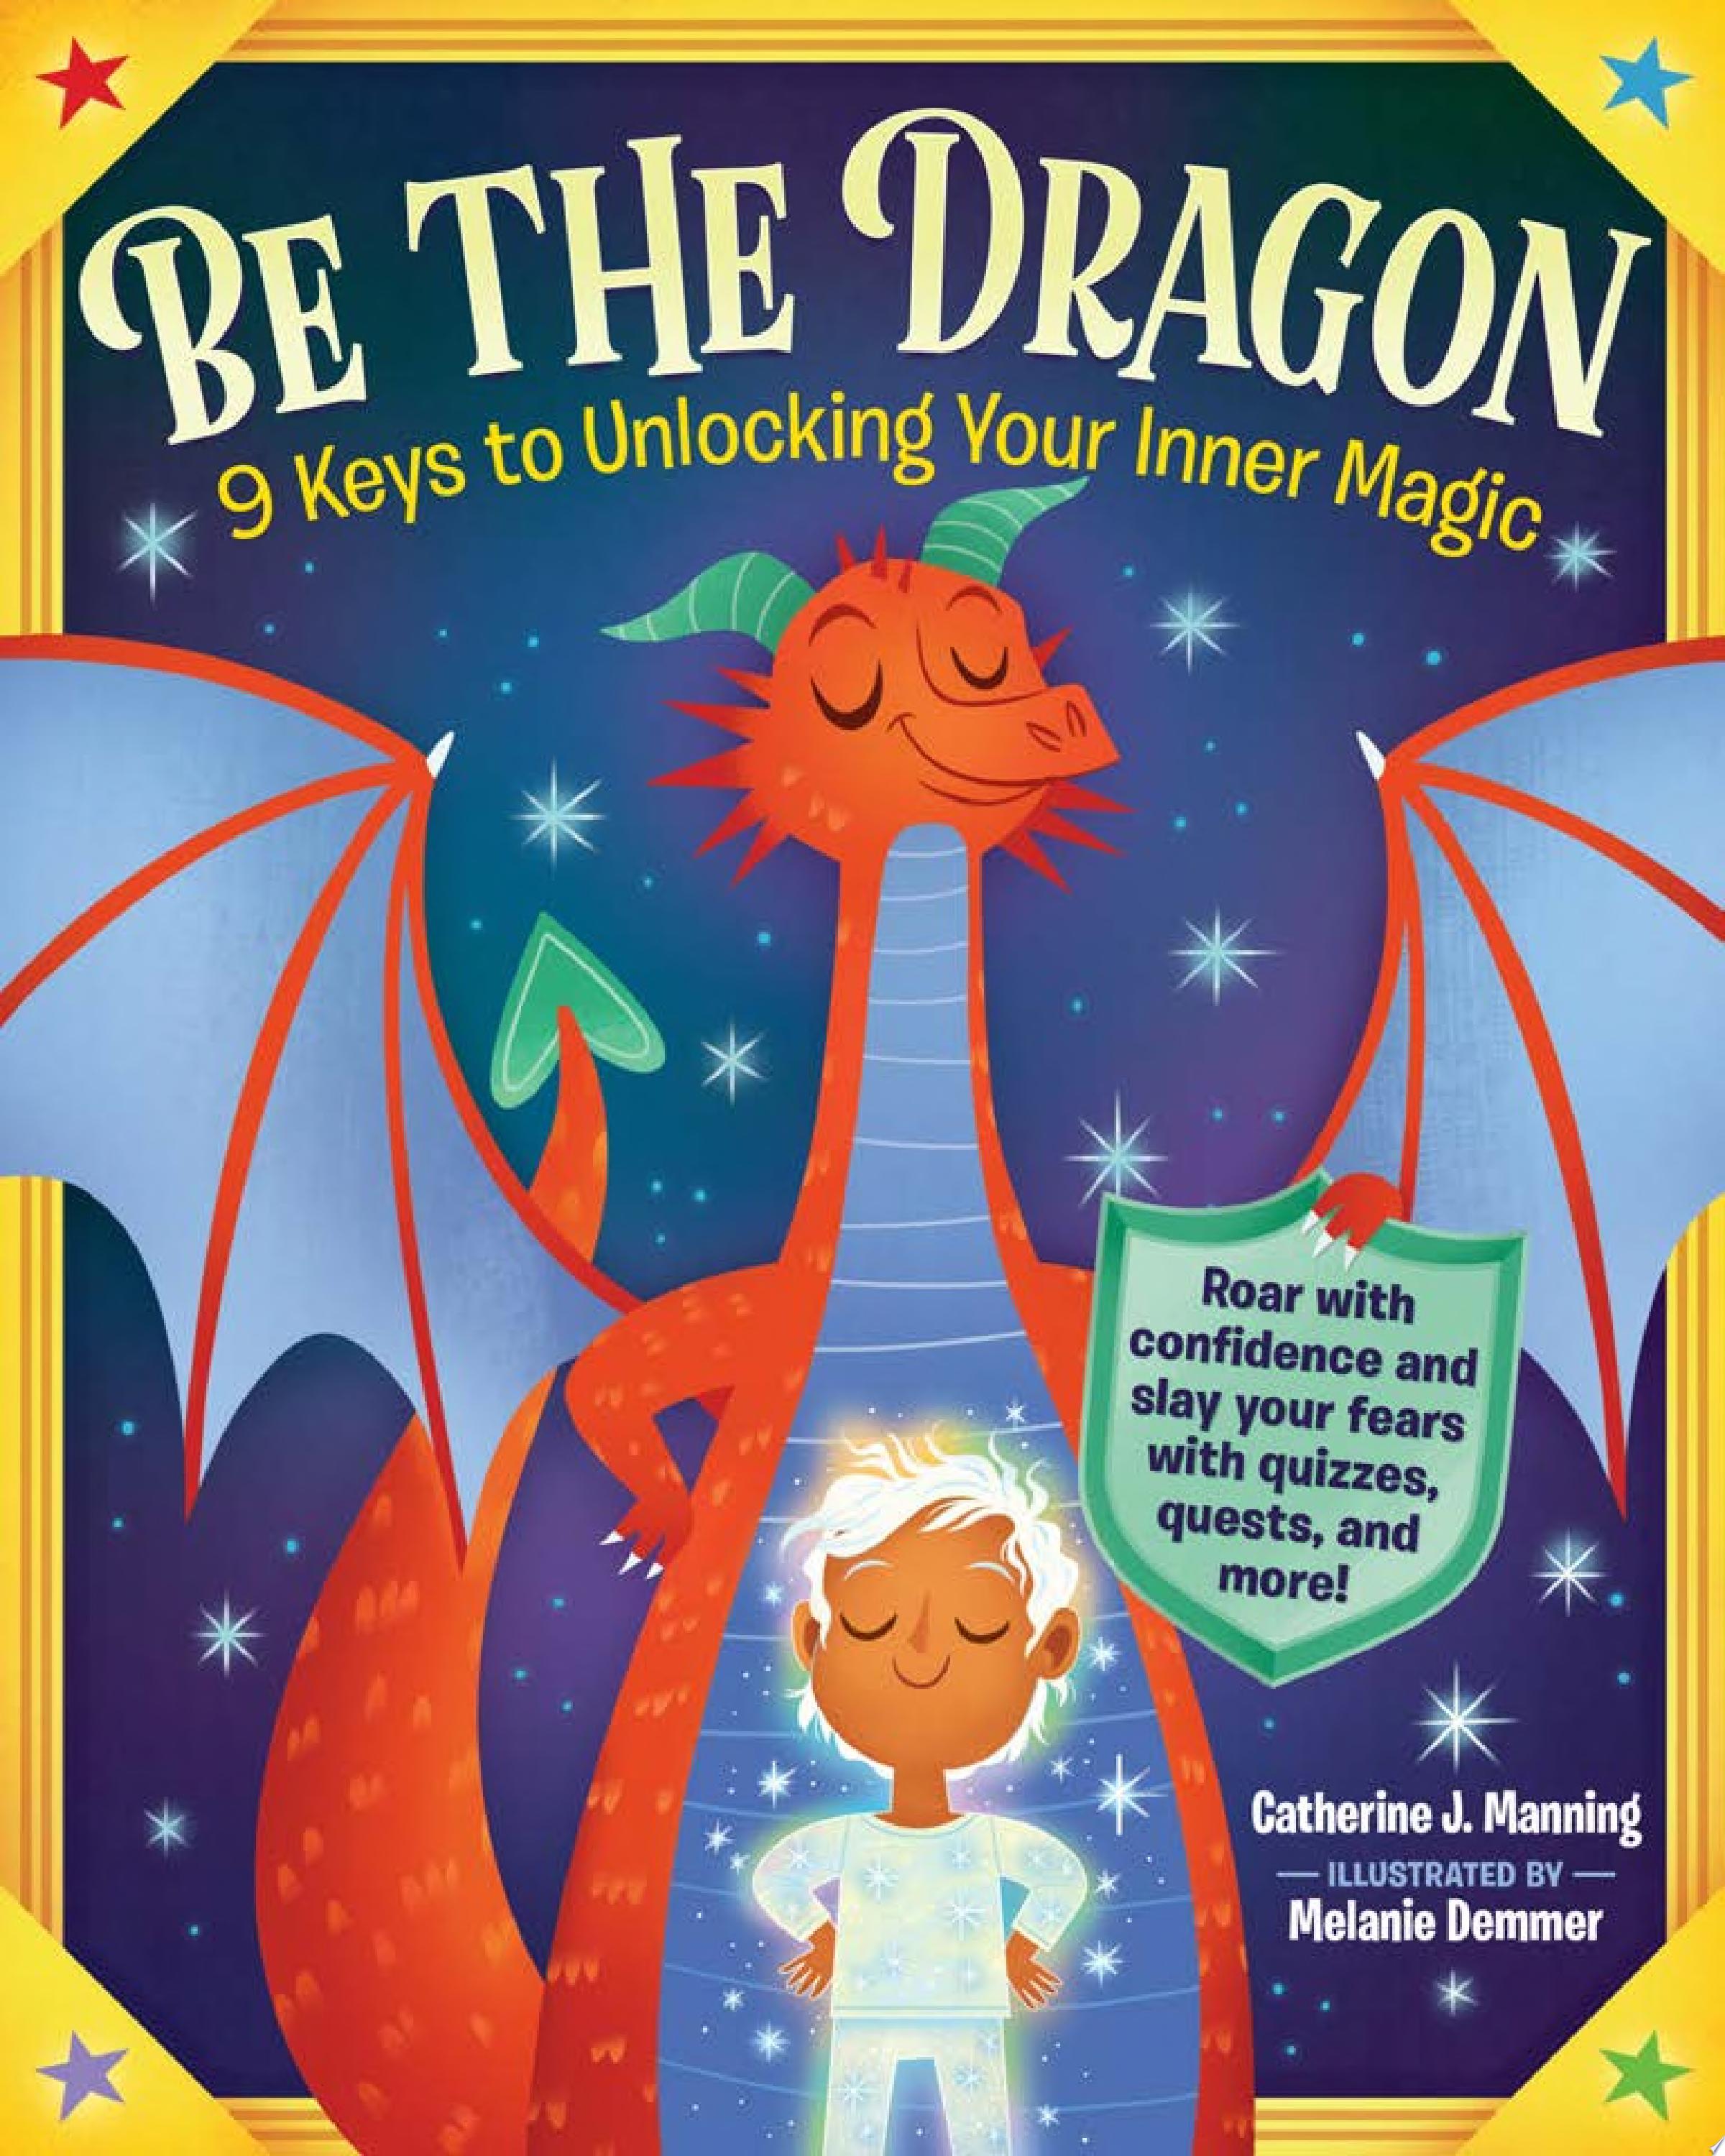 Image for "Be the Dragon: 9 Keys to Unlocking Your Inner Magic"